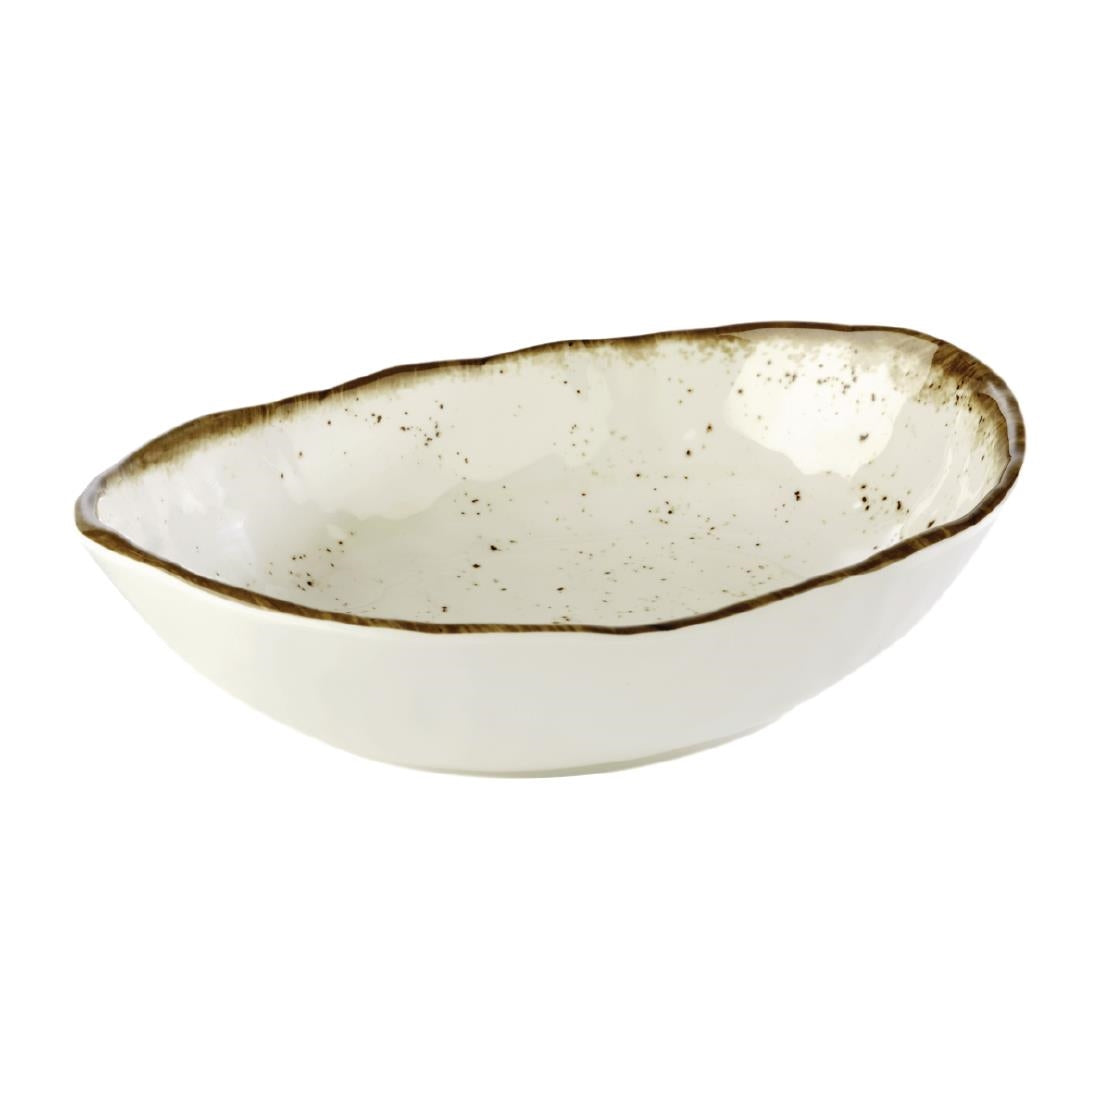 HC701 APS Stone Art Oval Bowl 285mm length JD Catering Equipment Solutions Ltd